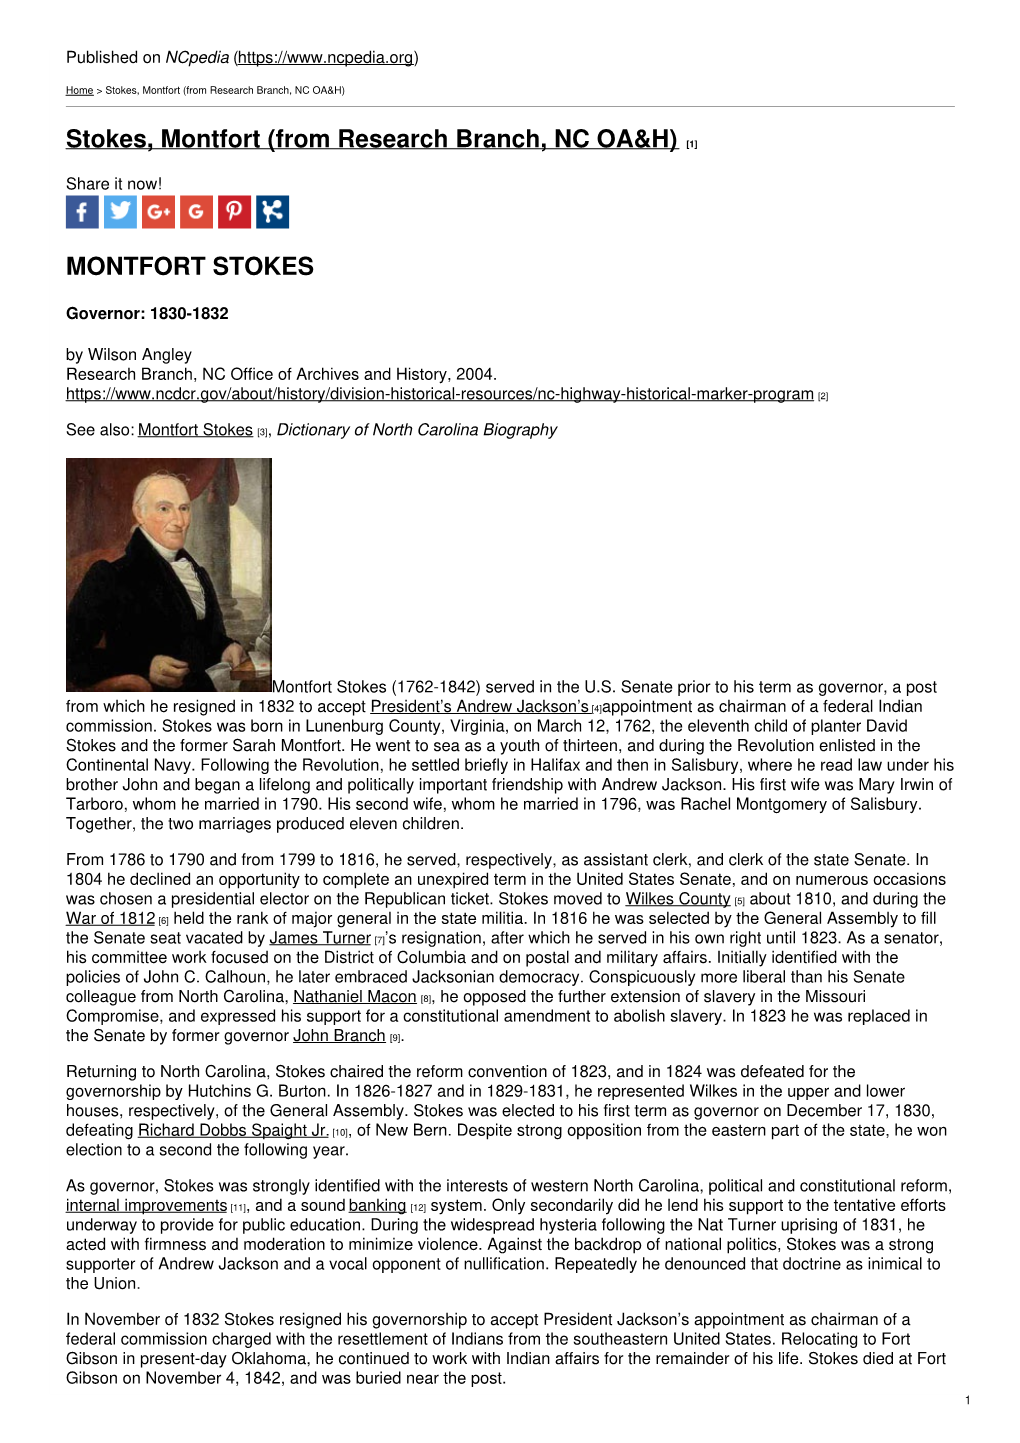 Stokes, Montfort (From Research Branch, NC OA&H)